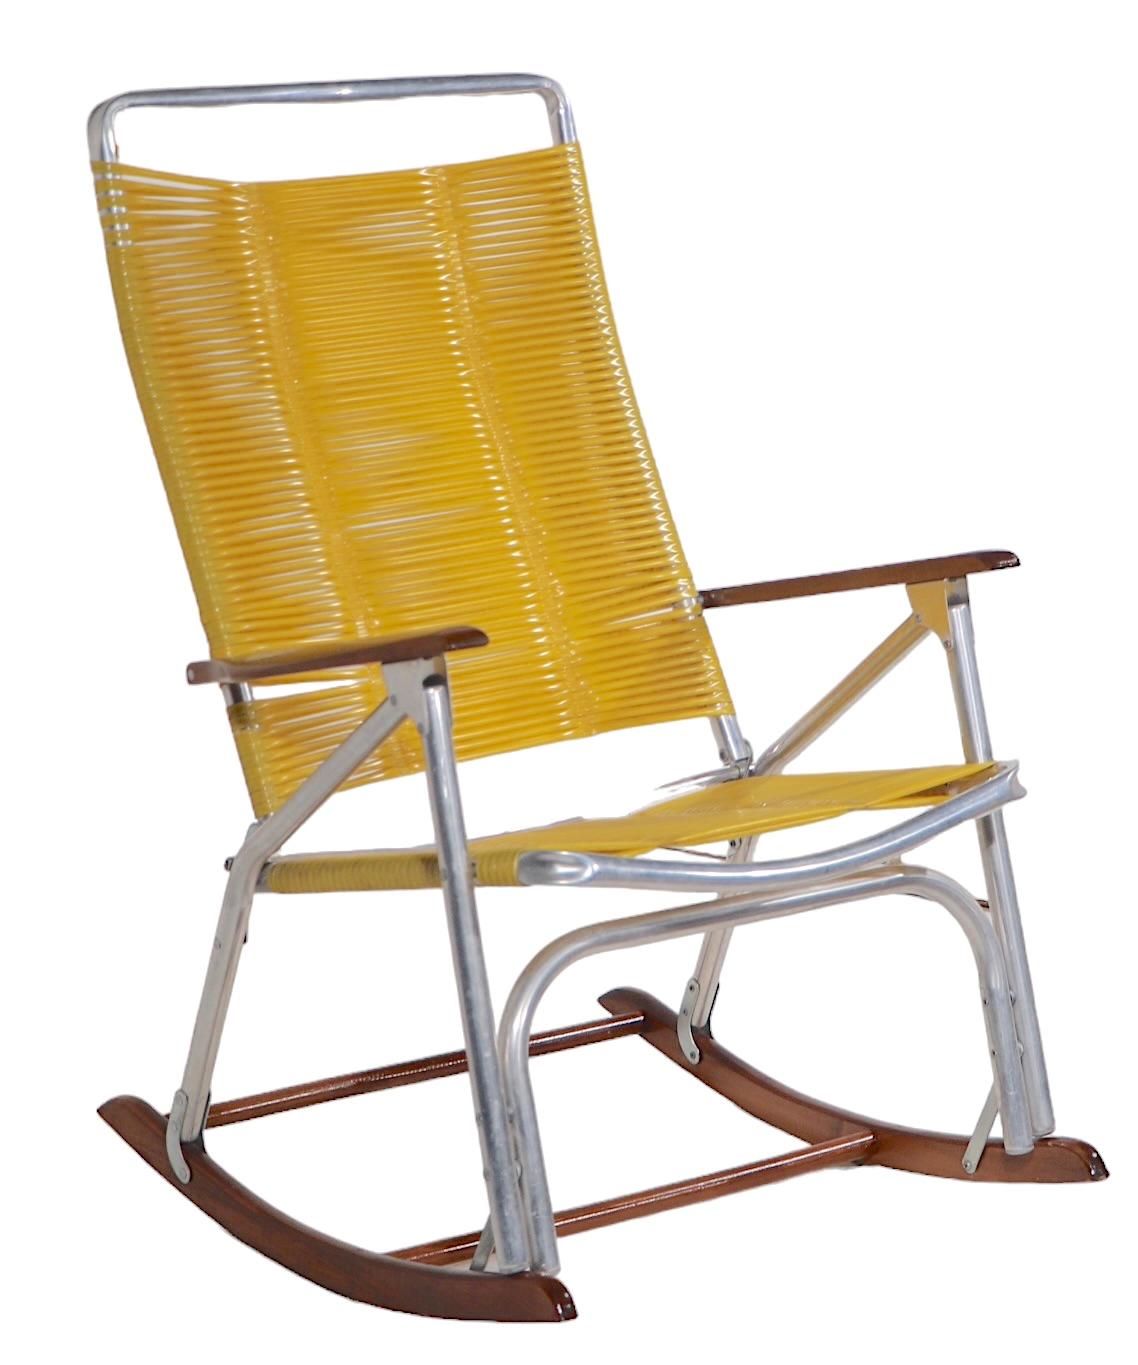 American Mid Century Patio Poolside   Rocking Chair by The Telescope Furniture Company  For Sale